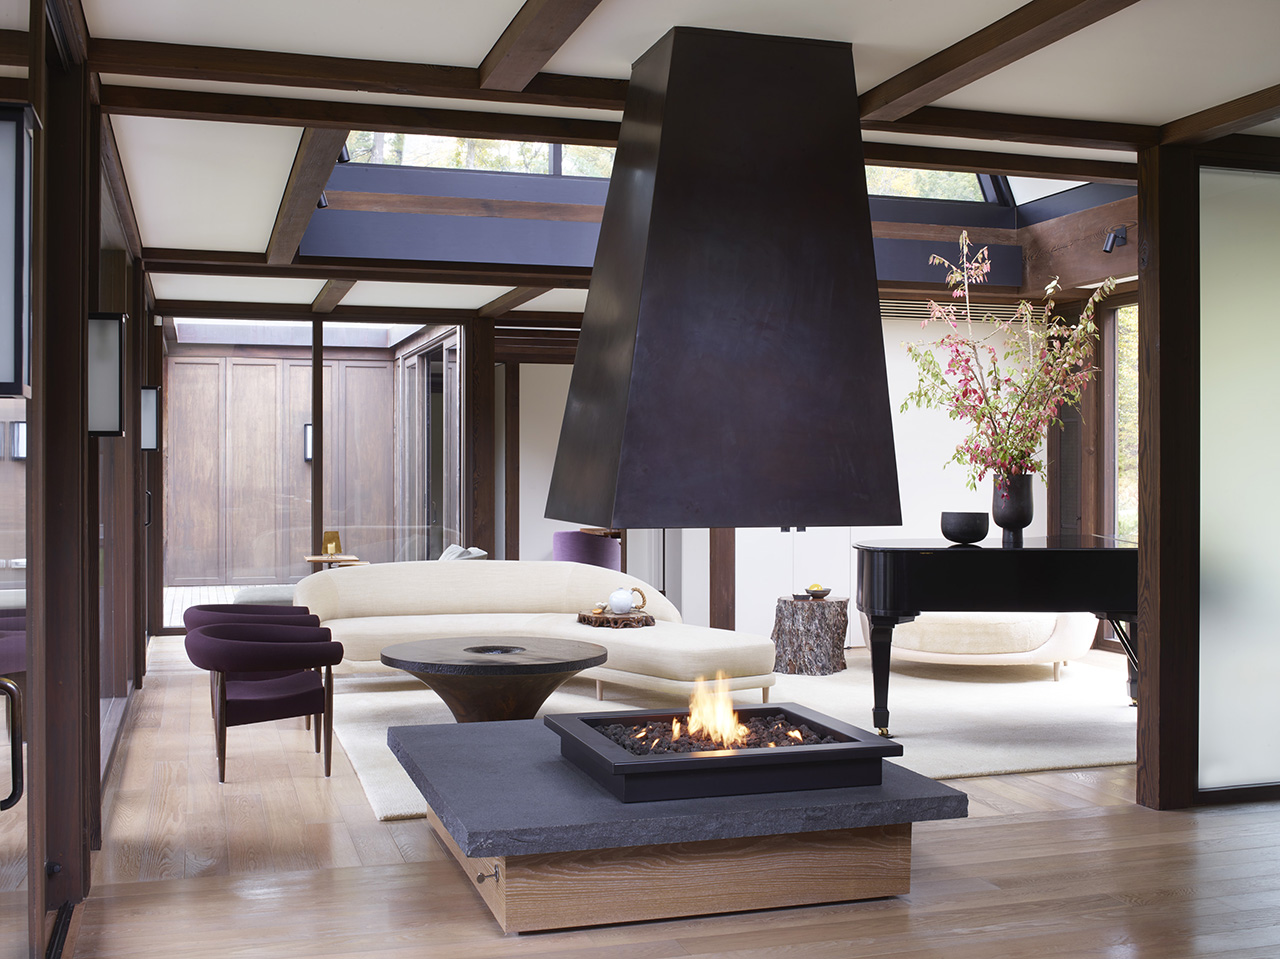 styled interior space with central fireplace